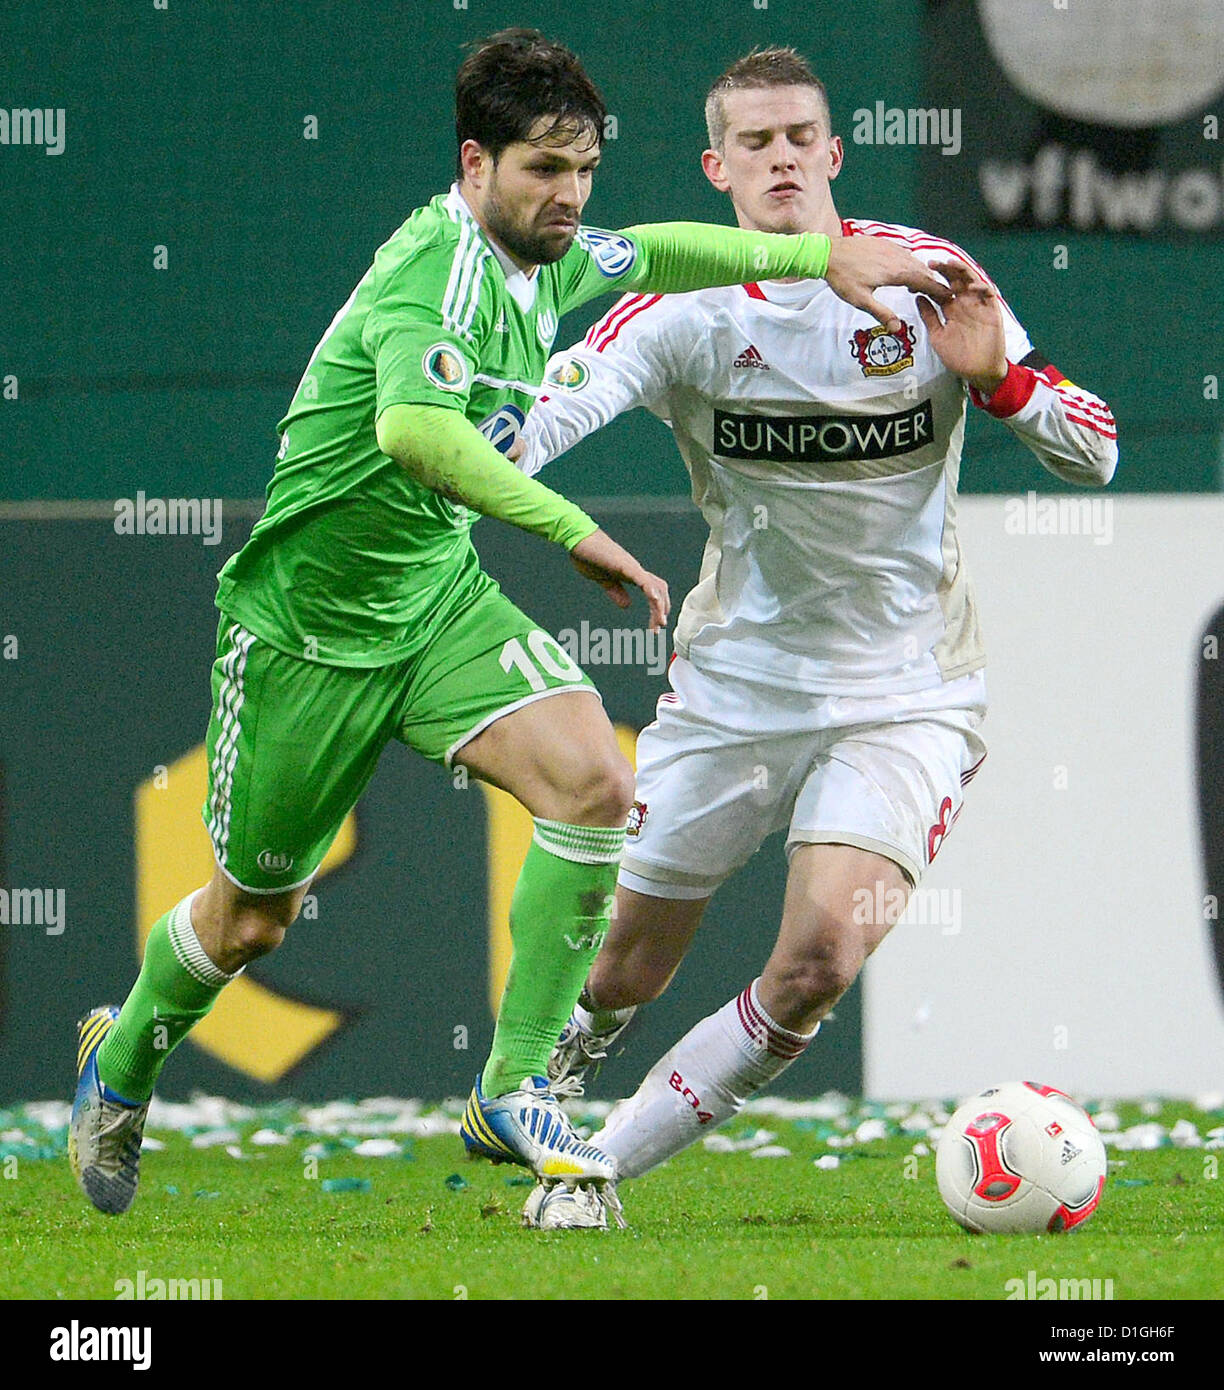 Wolfsburg's Diego (L) and Leverkusen's Lars Bender vie for the ball during the DFB Cup soccer match between VfL Wolfsburg and Bayer Leverkusen at the Volkswagen-Arena in Wolfsburg, Germany, 19 December 2012. Photo: Peter Steffen Stock Photo